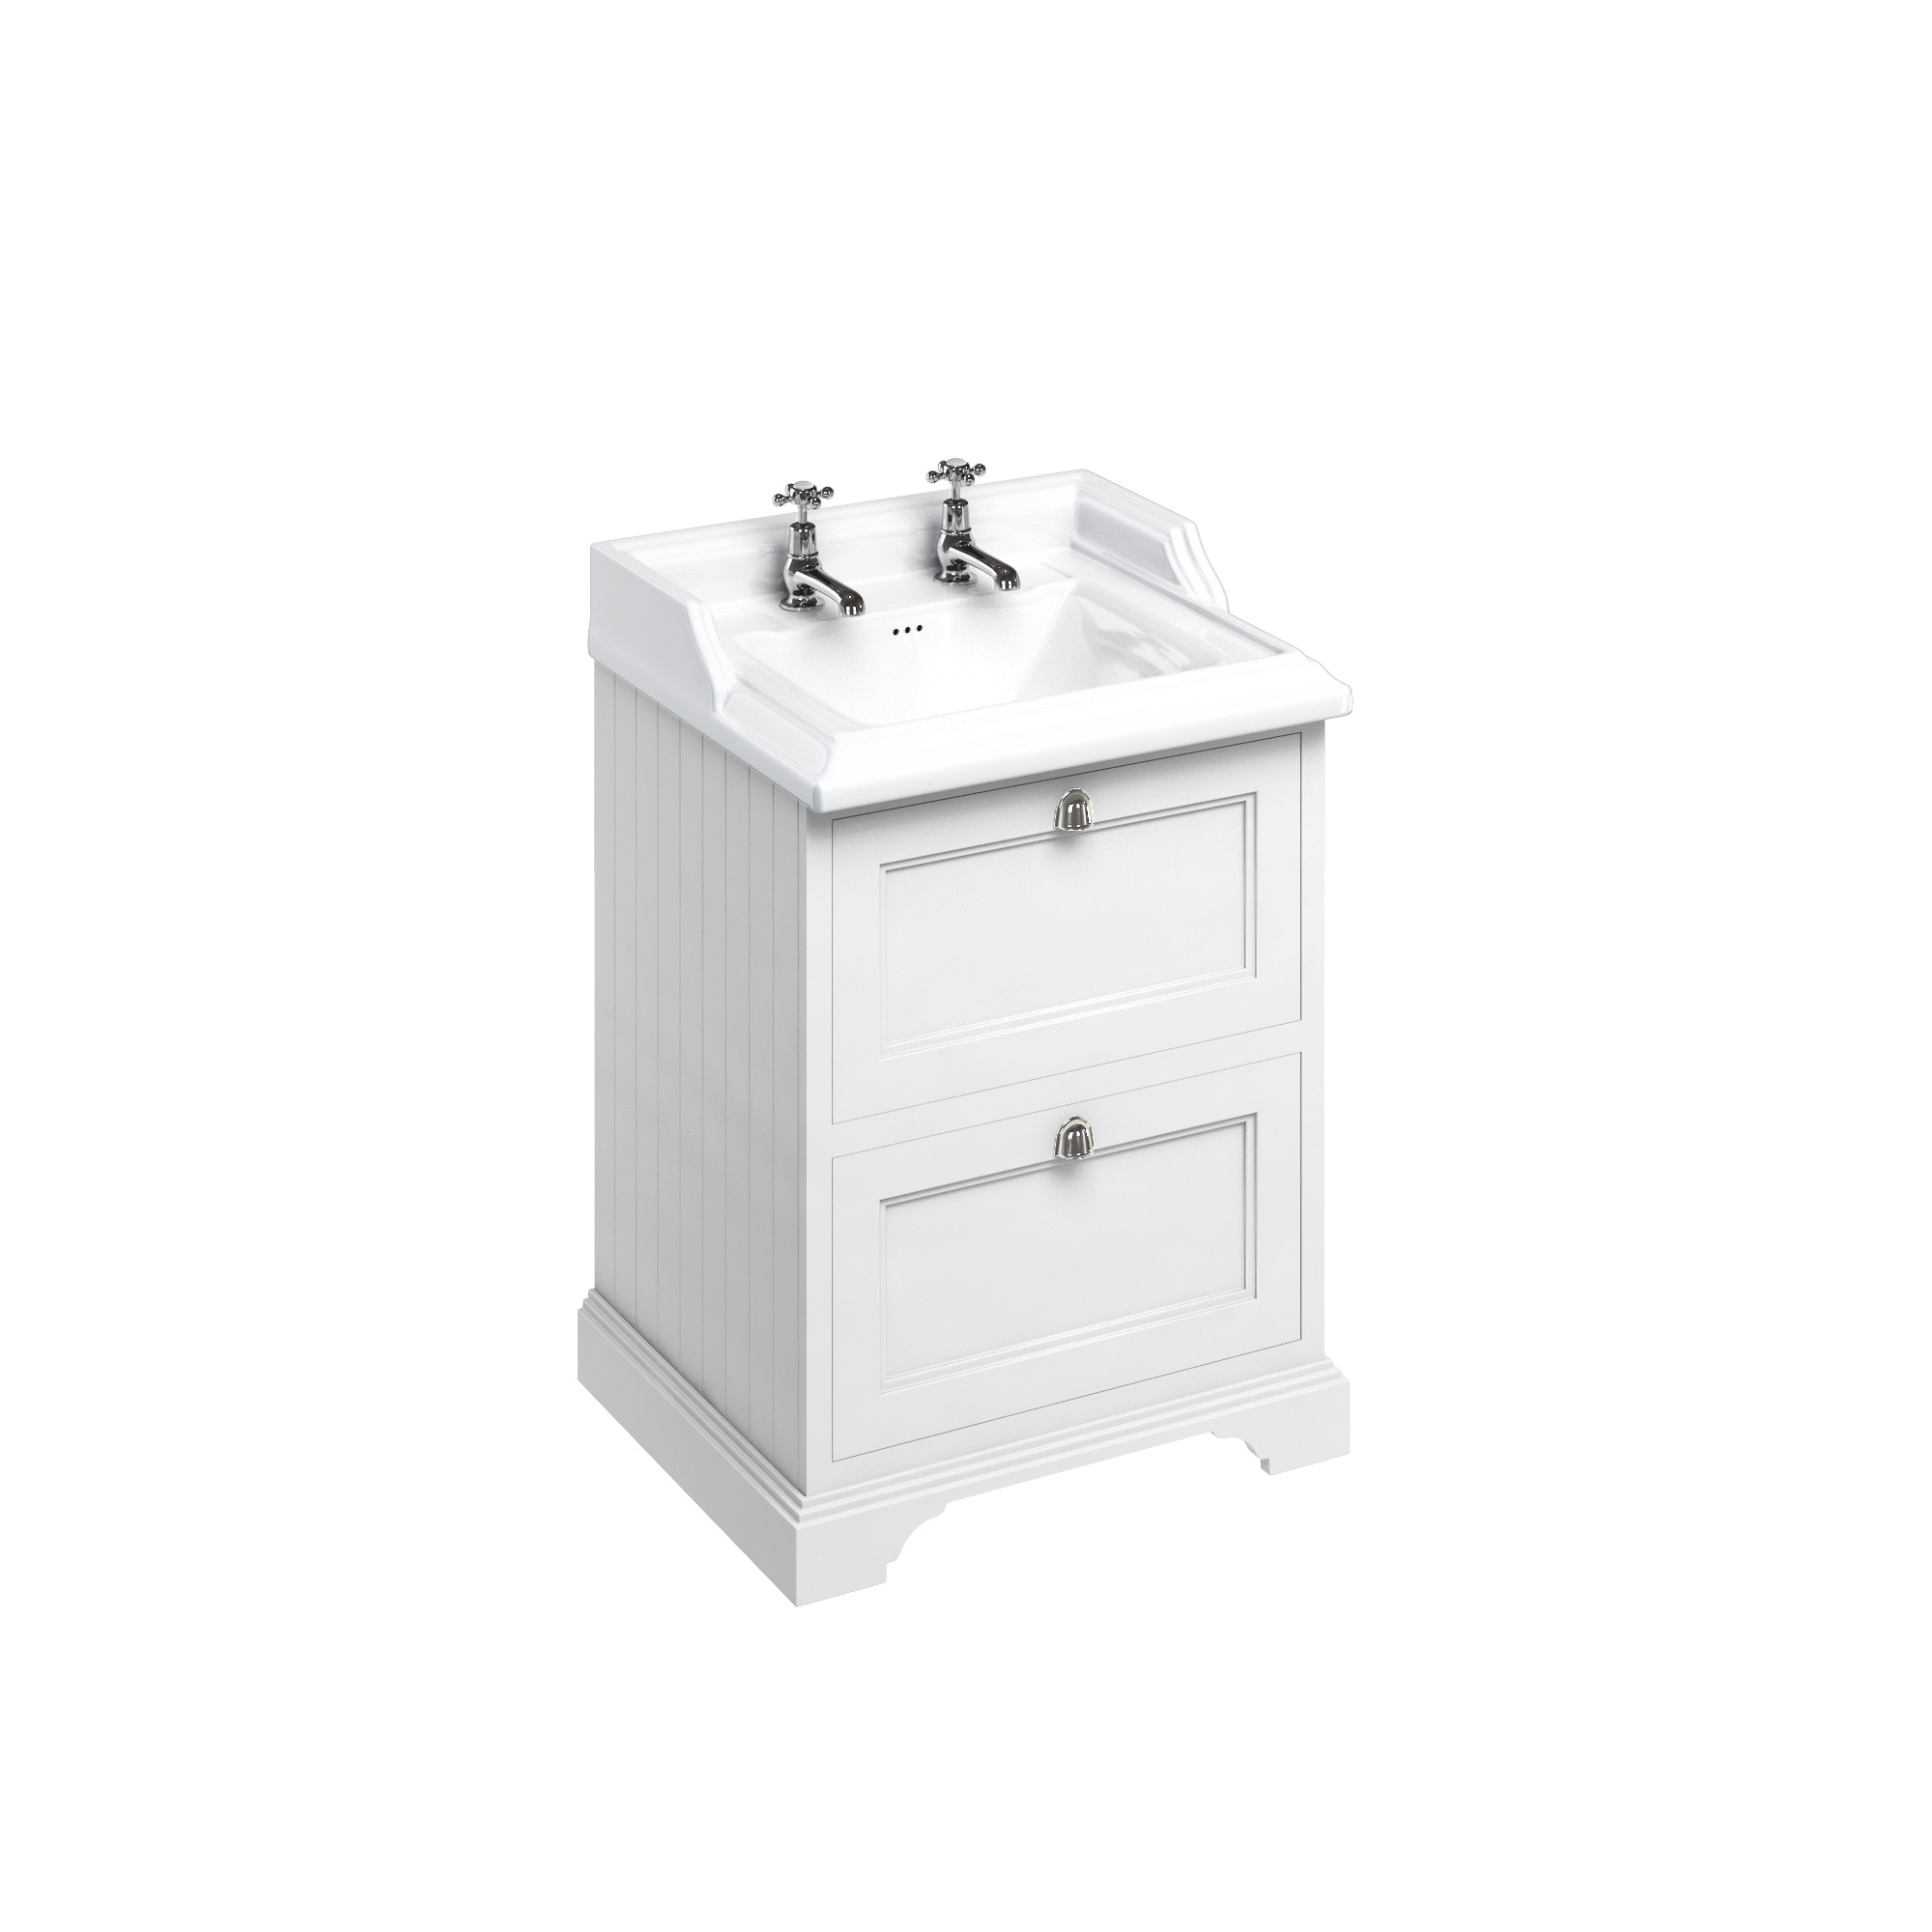 Freestanding 65 Vanity Unit with 2 drawers - Matt White and Classic basin 2 tap holes